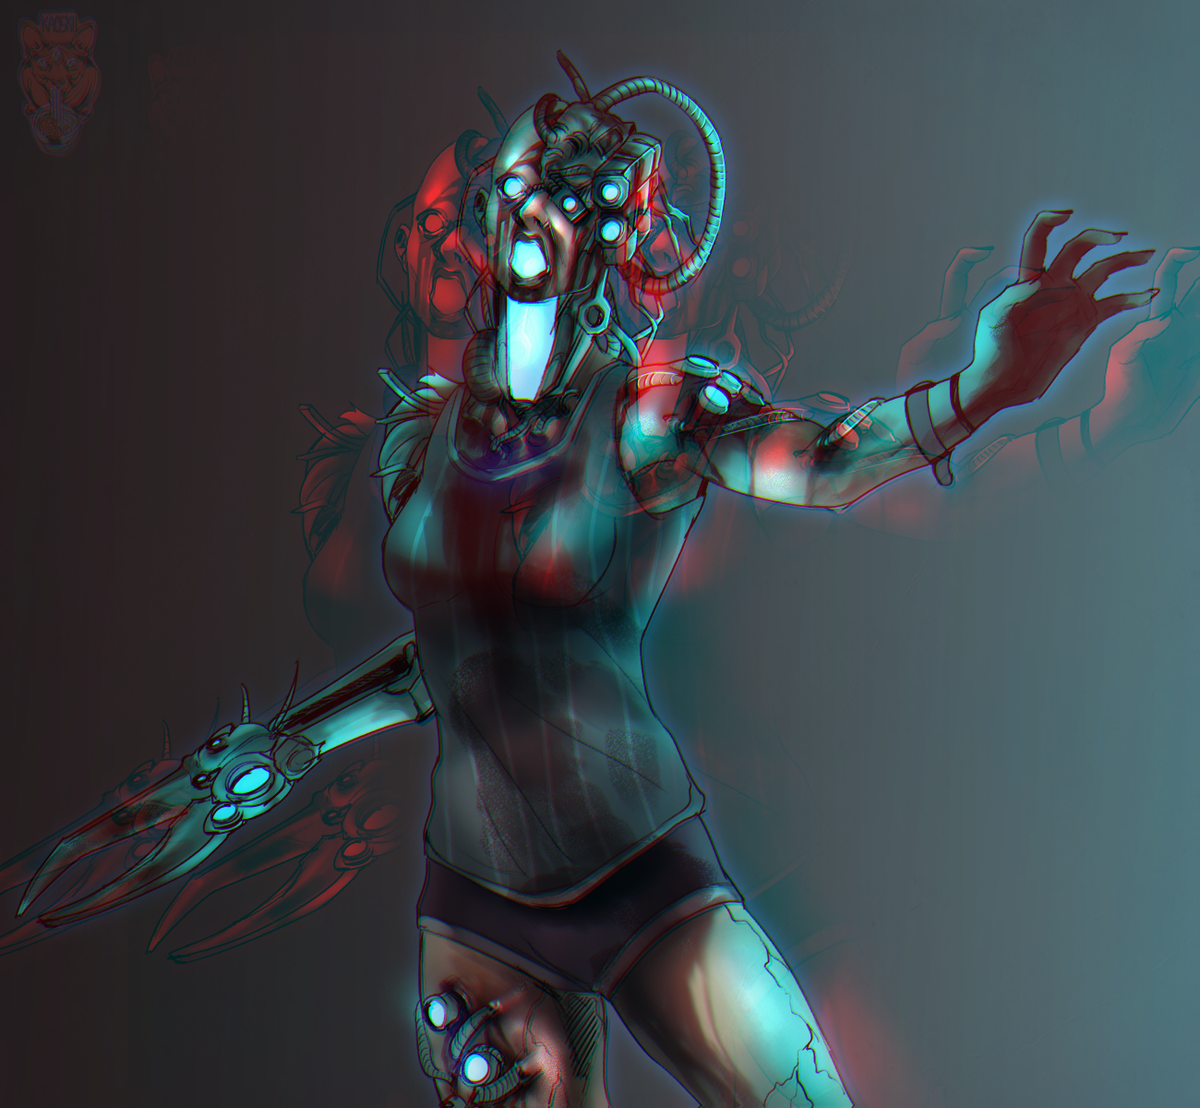 Robot head from SOMA, a game that never gets old @frictionalgames.